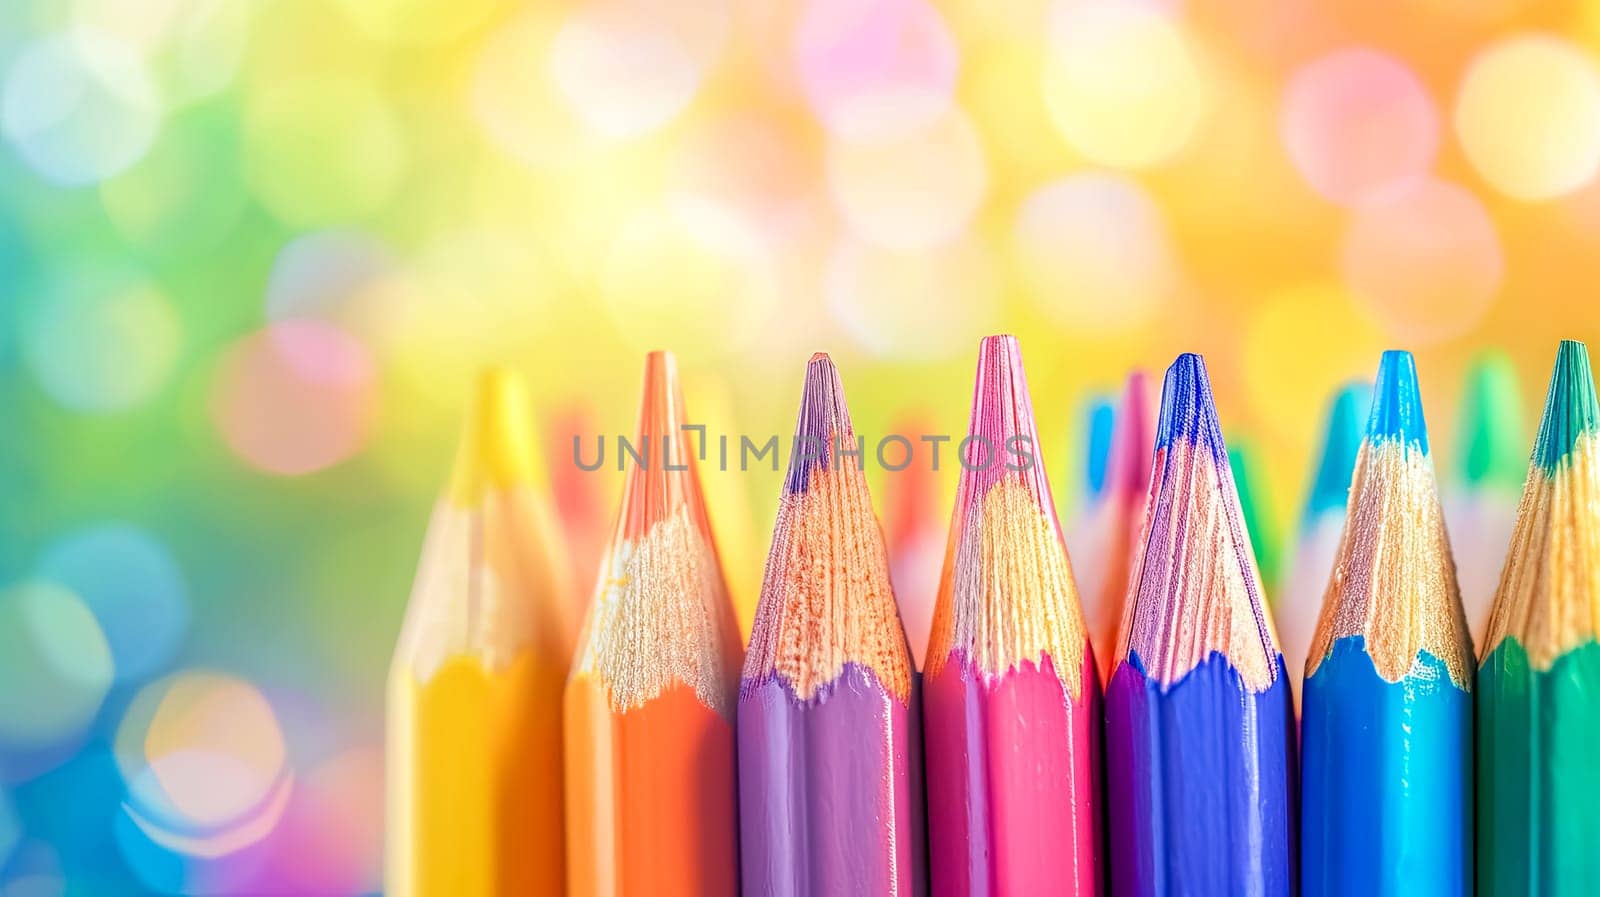 Colors of Creativity: A spectrum of possibilities awaits as sharpened pencils stand ready to transform blank pages into explosions of vibrant ideas and artistry by Edophoto